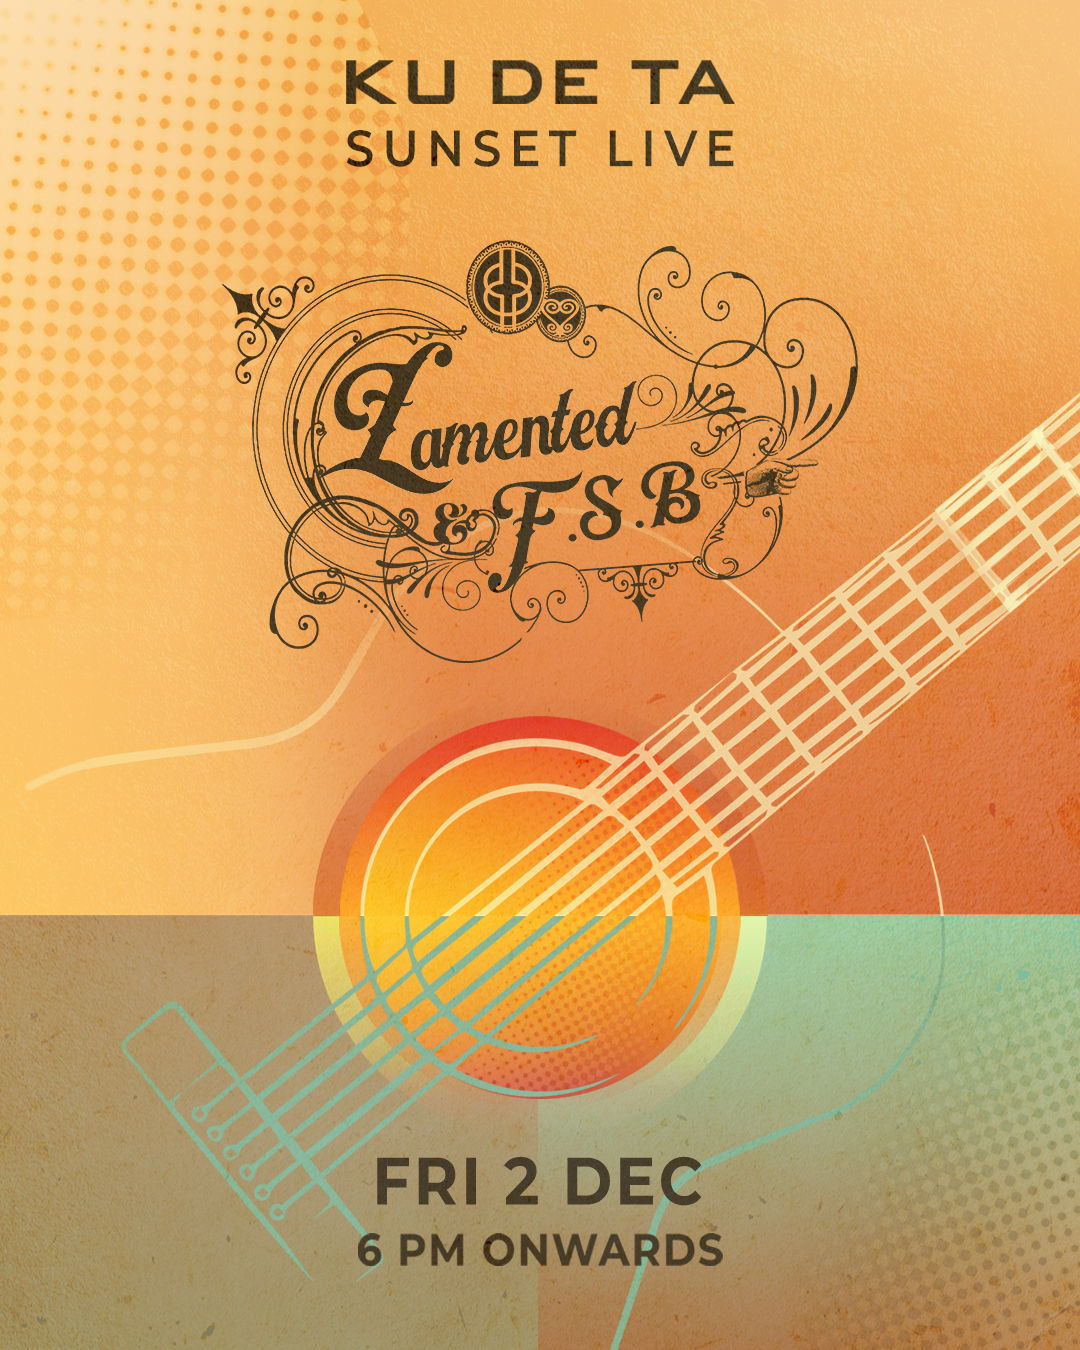 SUNSET LIVE AT KU DE TA WITH LAMENTED AND F.S.B – FRIDAY DECEMBER 2ND thumbnail image